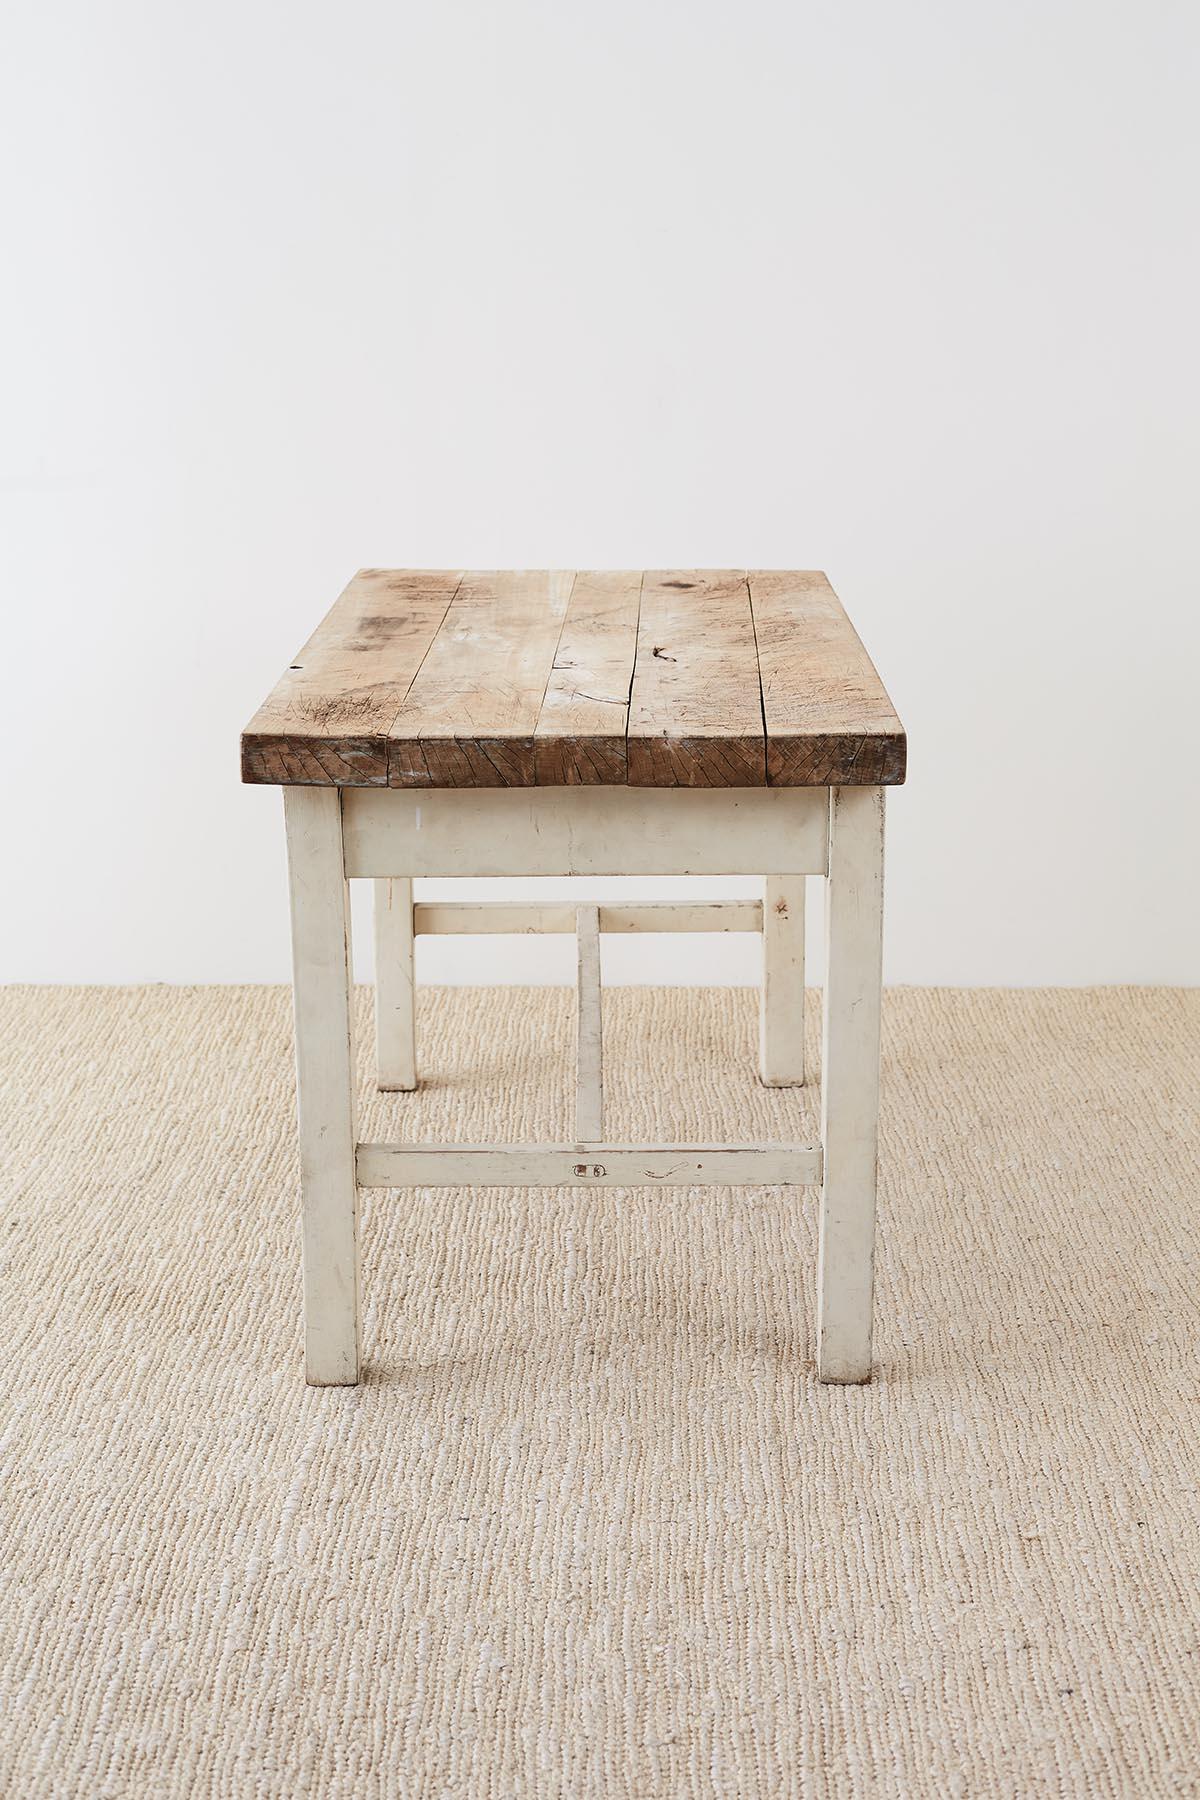 Hand-Crafted Rustic American Farmhouse Butcher Block Work Table